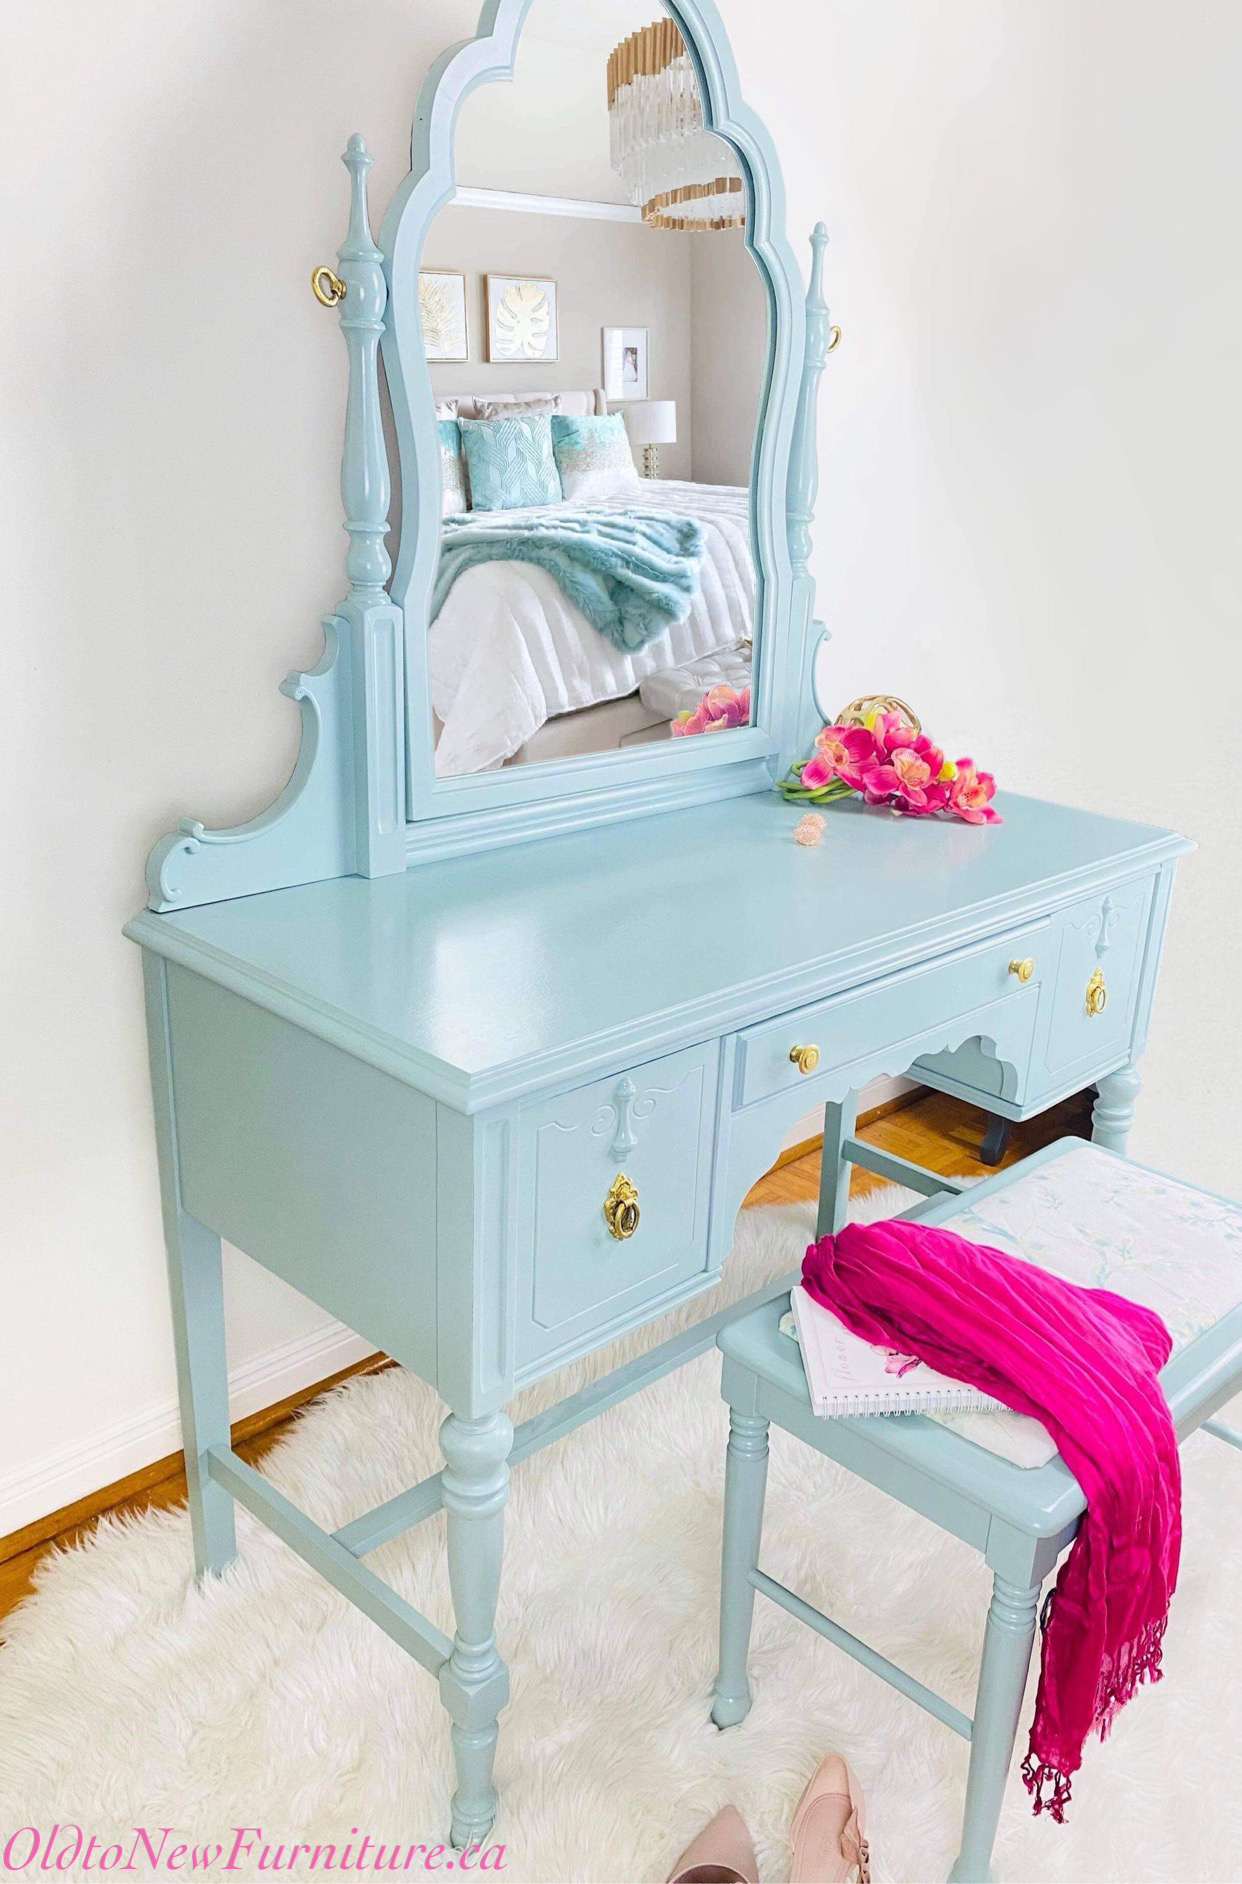 Custom Refinished Antique Makeup Vanity Painted Blue With Fusion Mineral Paint